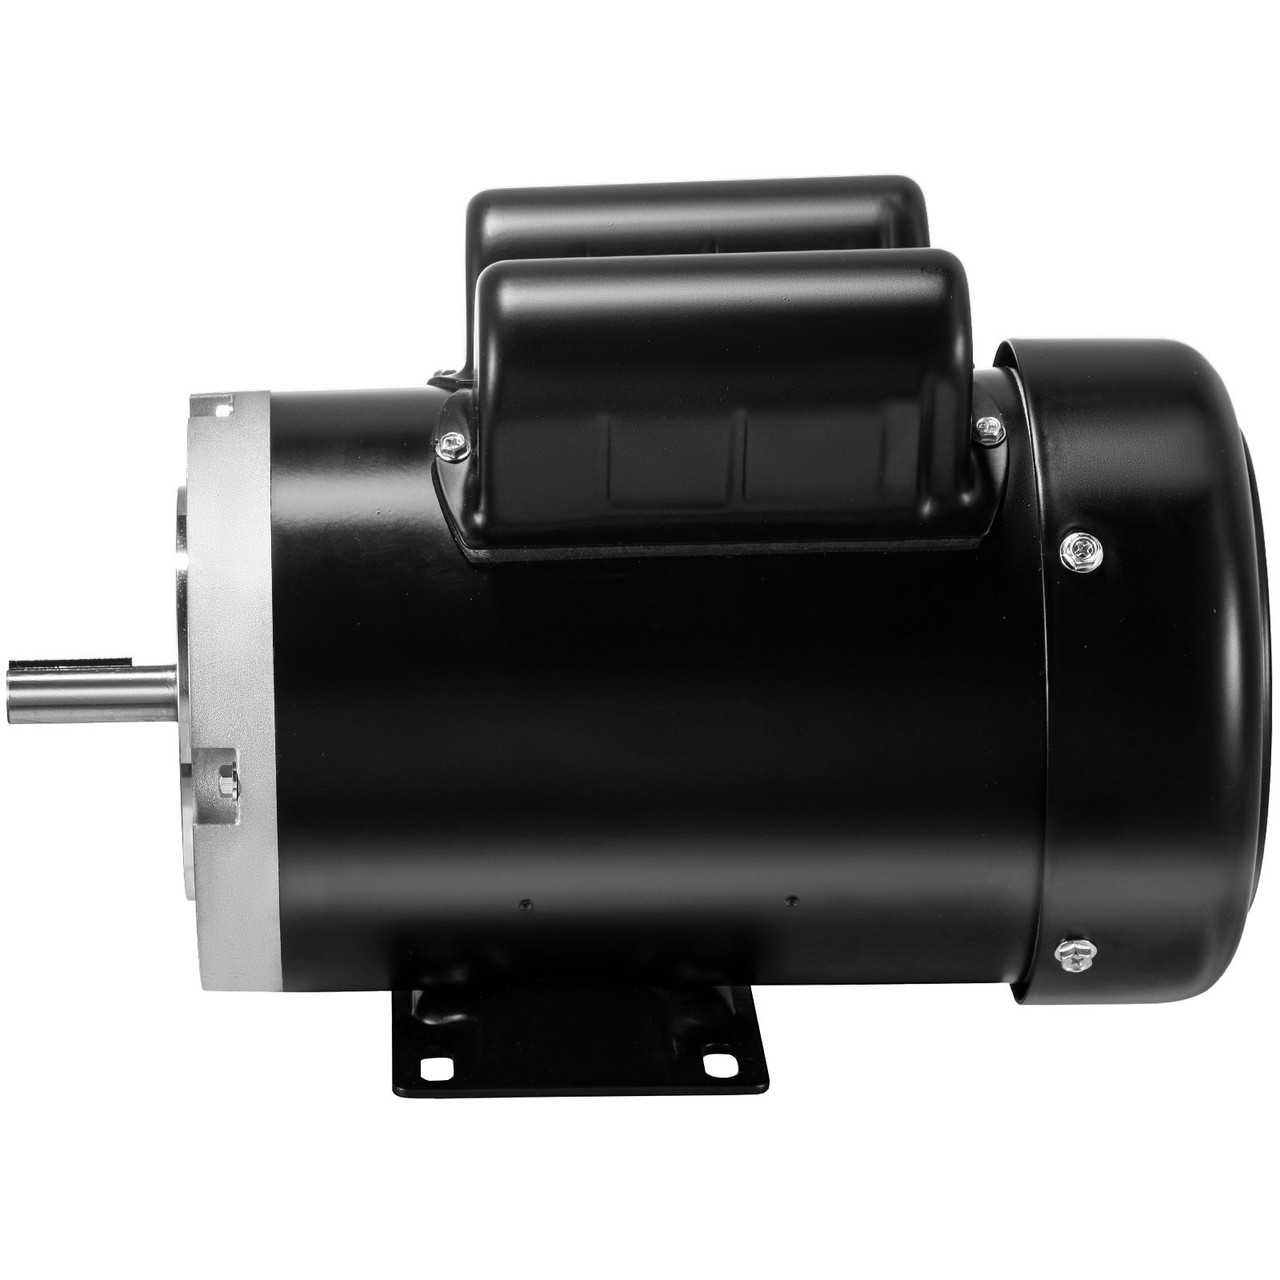 Electric Compressor Motor, HP, Rated Speed 1725 RPM Single Phase Electric  Motor, AC 115V 230V